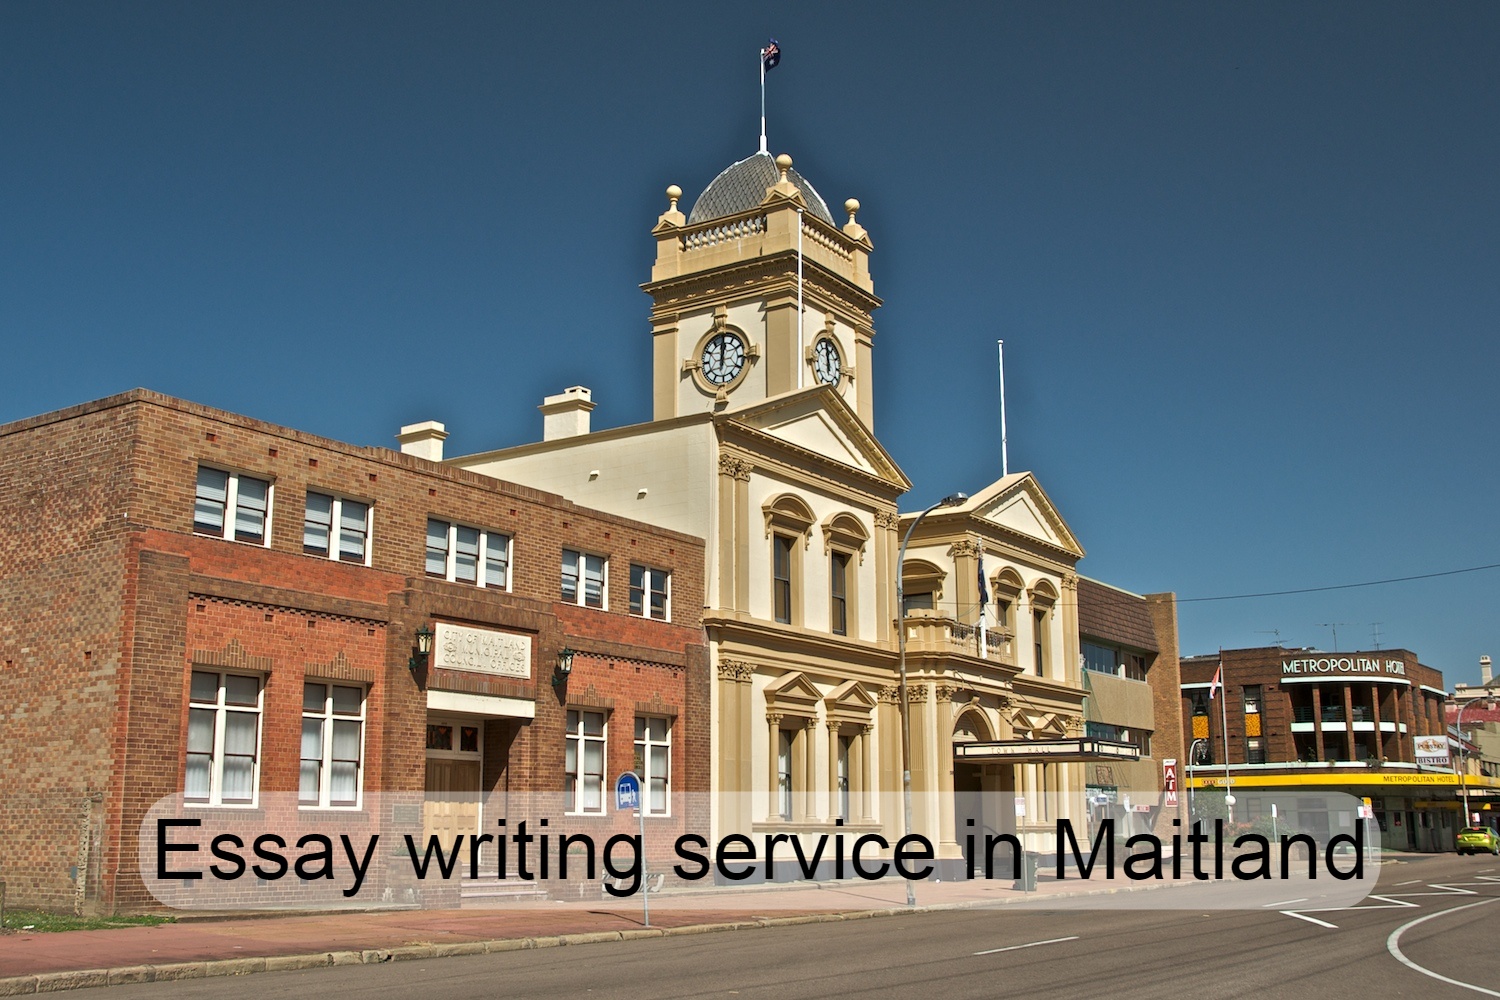 Essay writing service in Maitland